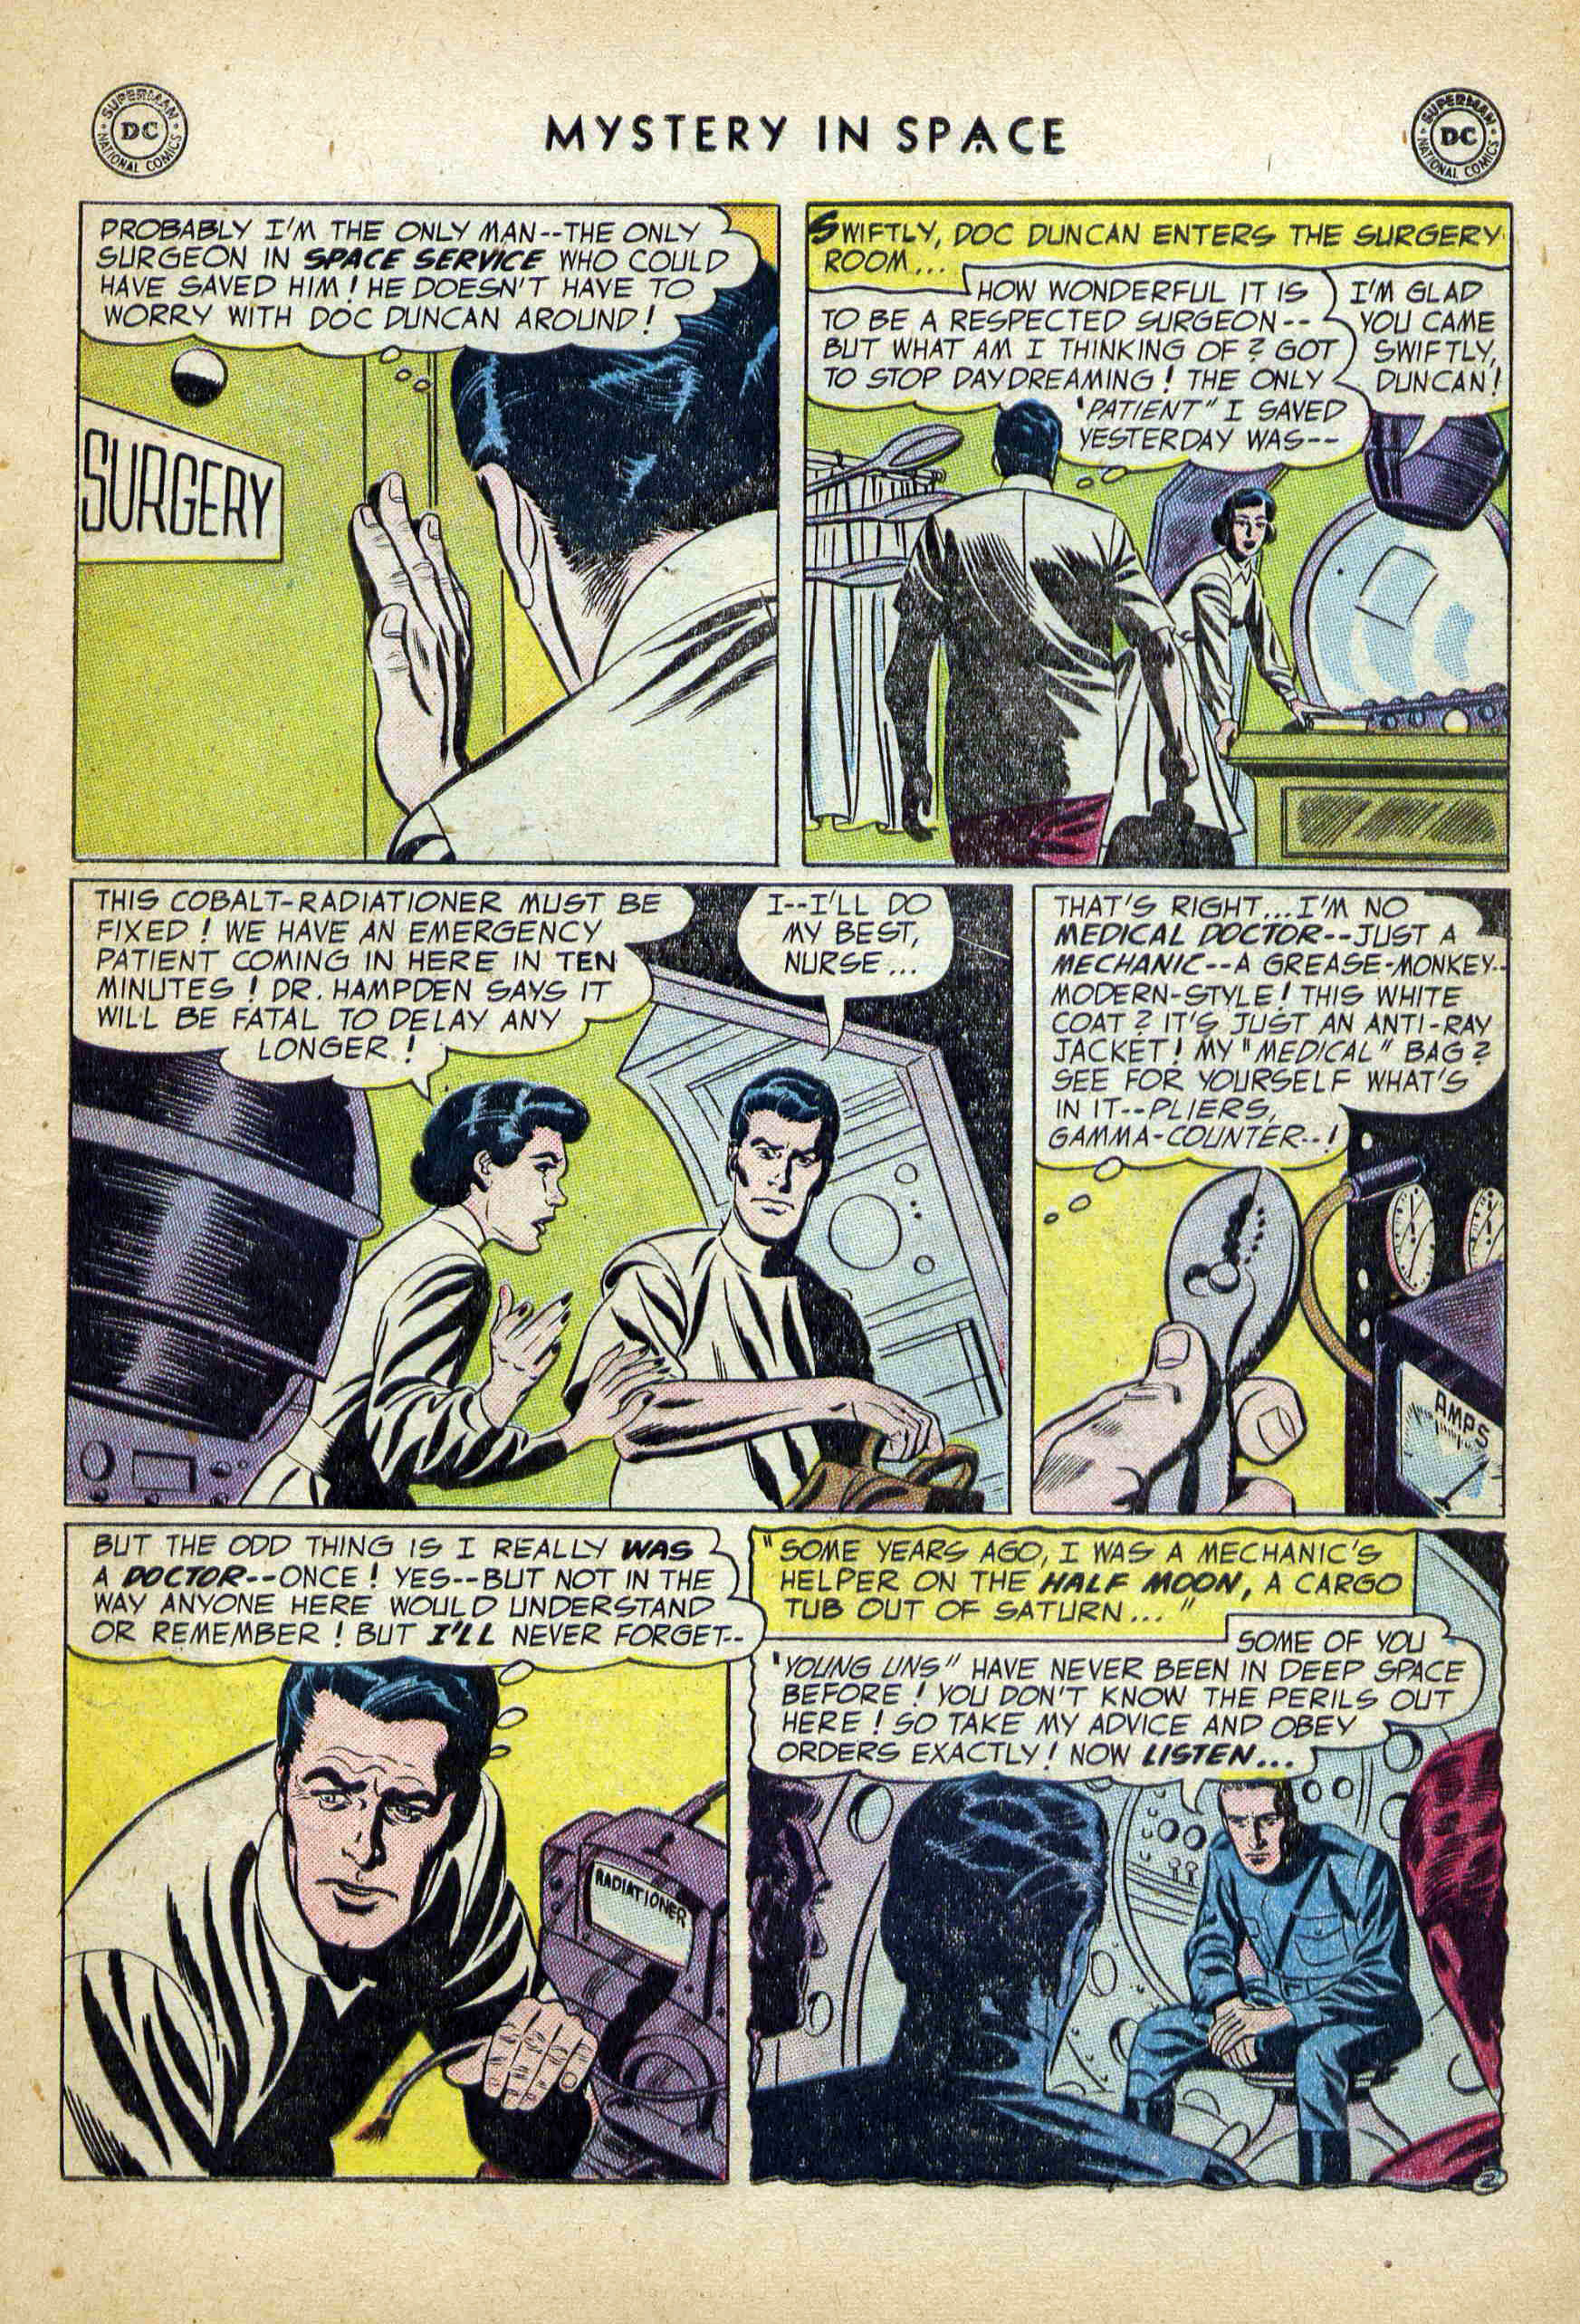 Mystery in Space (1951) 26 Page 12